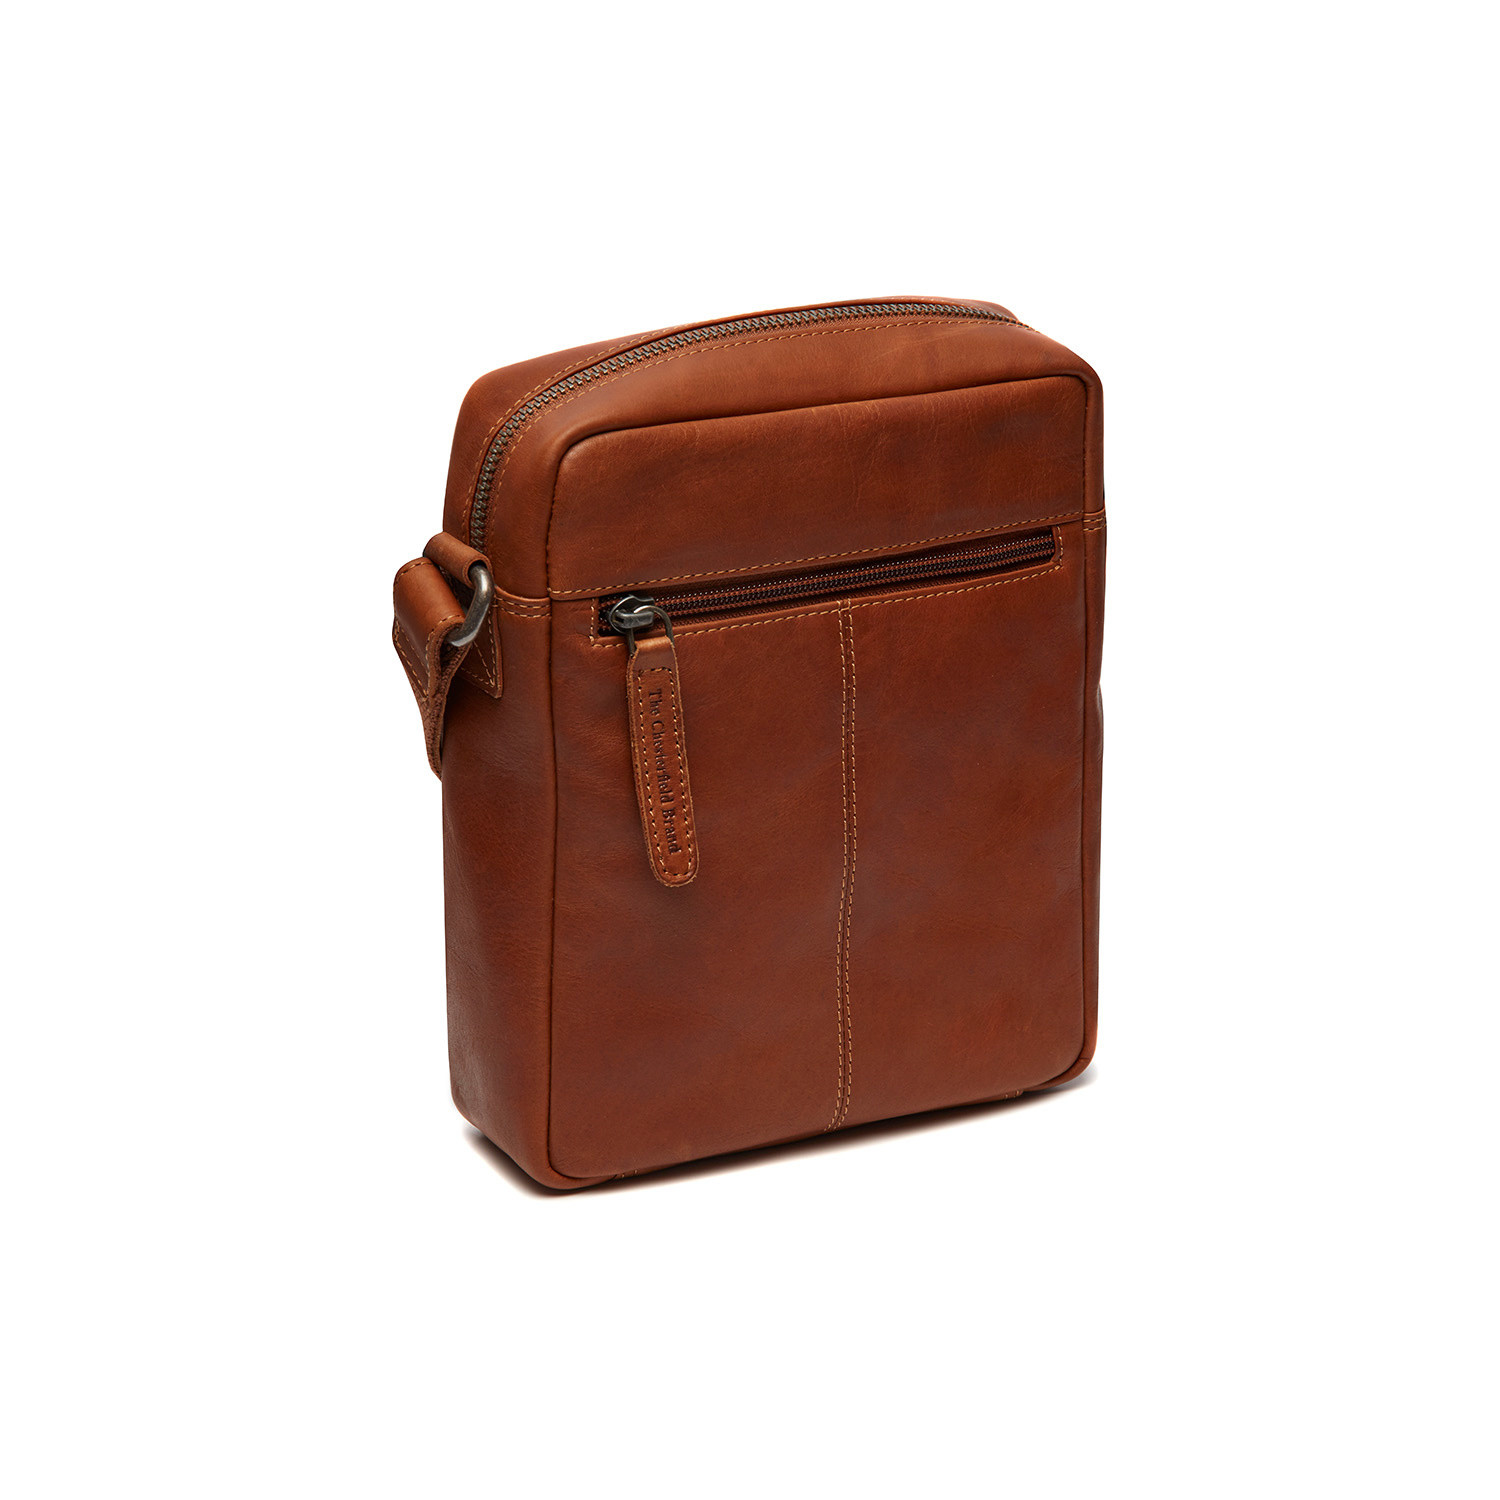 Leather Shoulder Bag Cognac Timor - The Chesterfield Brand